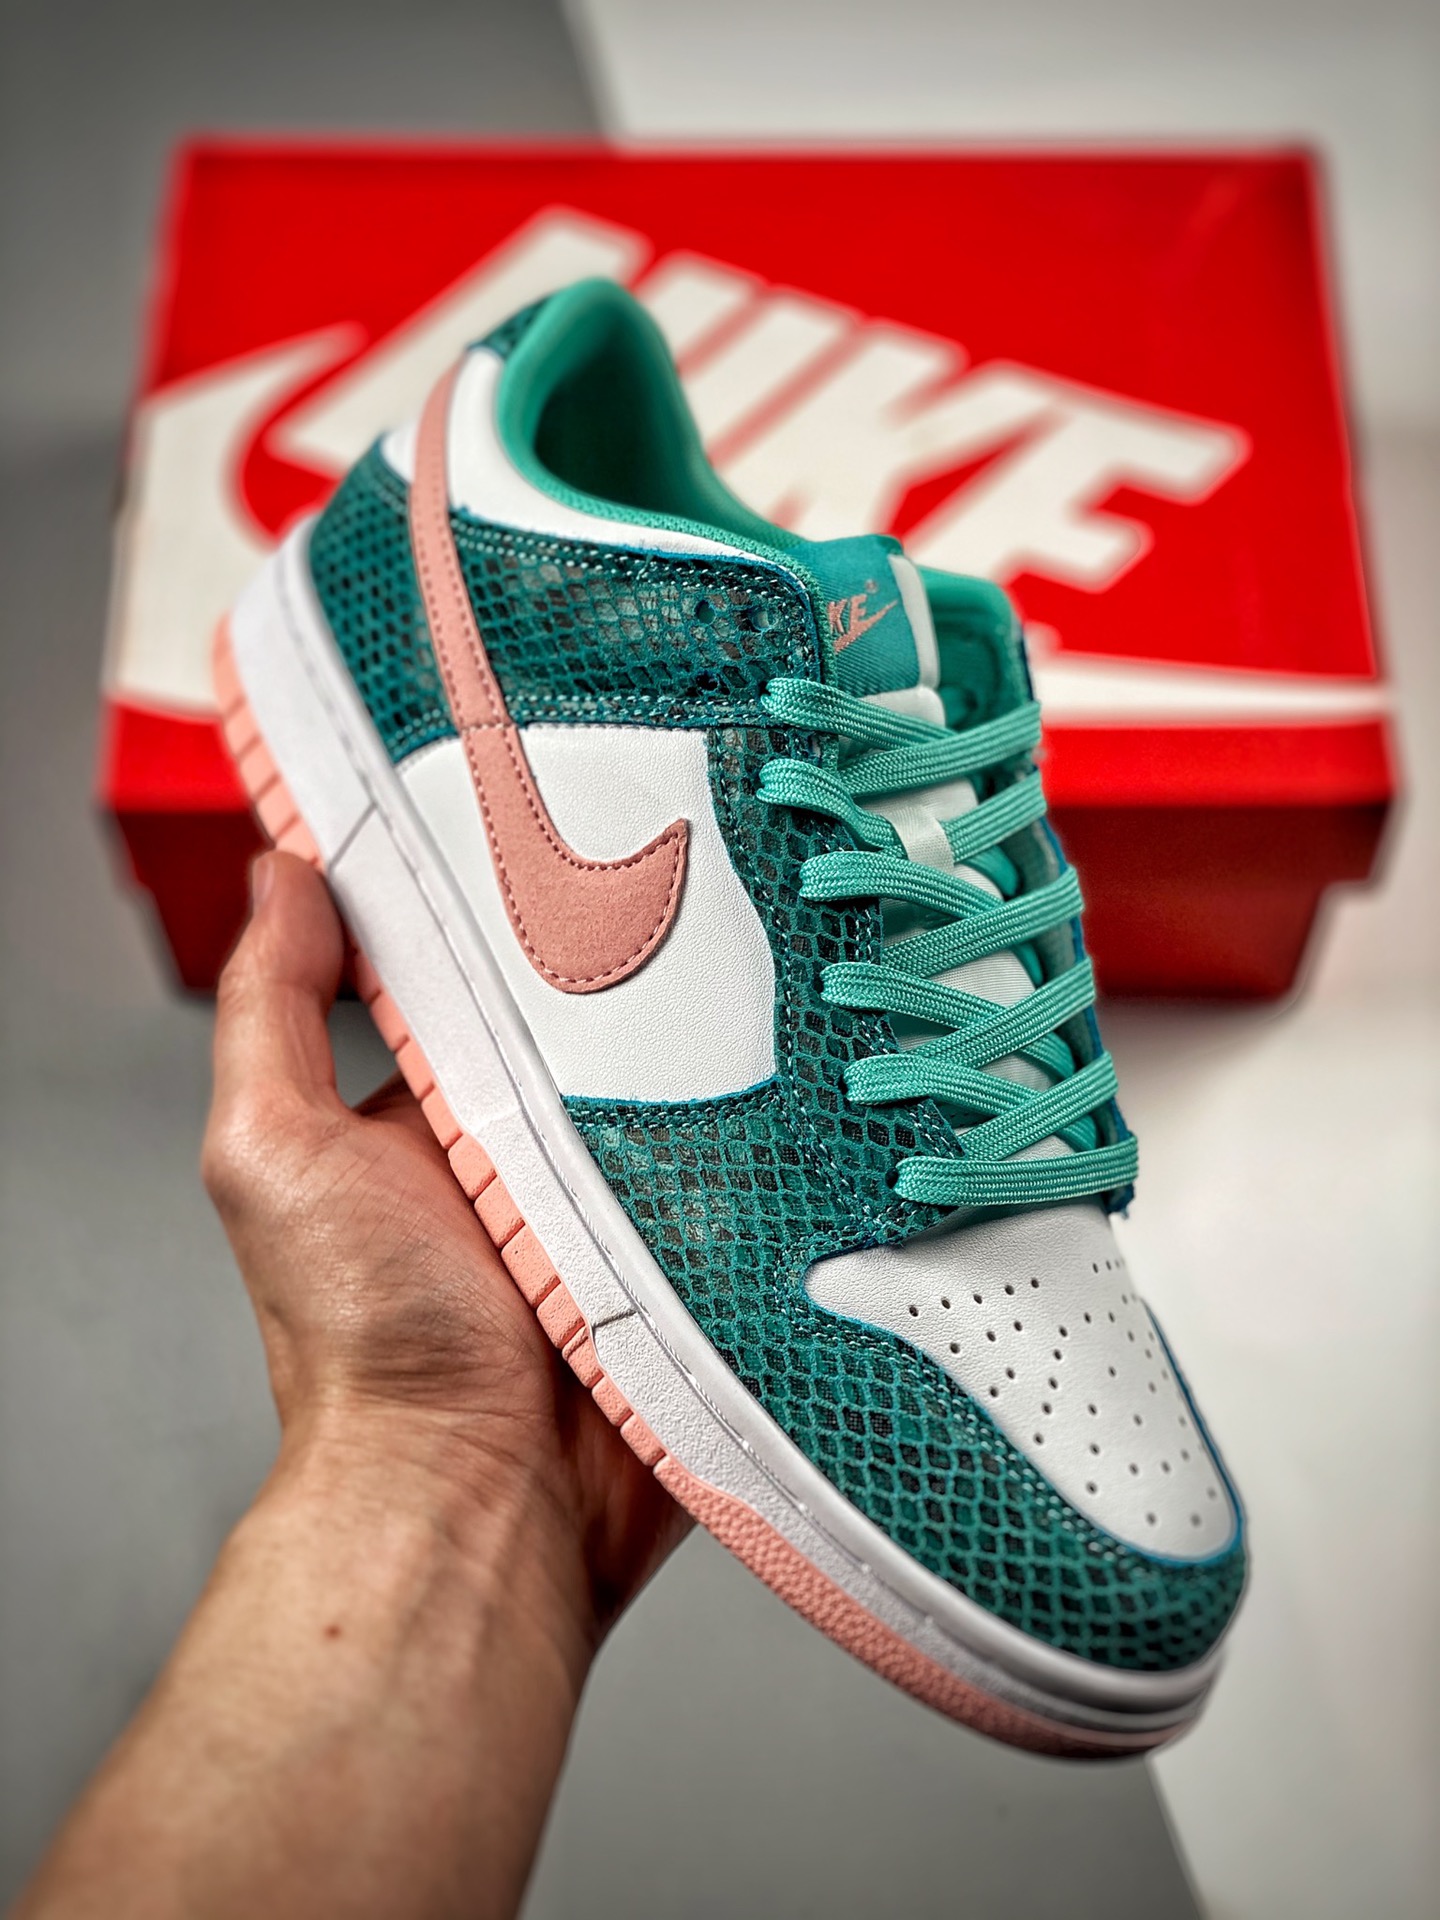 Nike Dunk Low "Snakeskin" White/Teal-Pink DR8577-300 Shoes